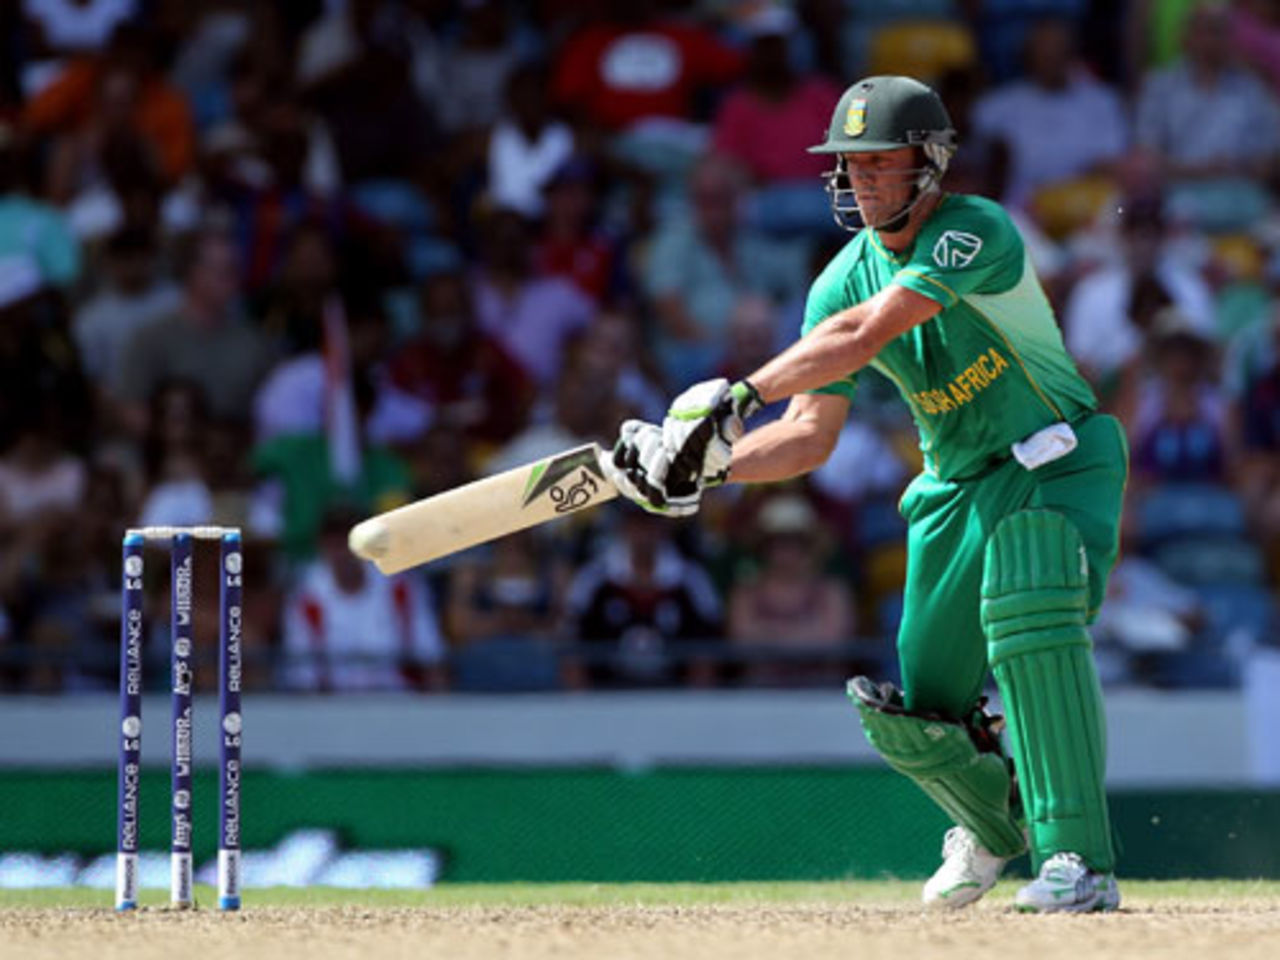 AB de Villiers looks to score through the off side, New Zealand v South Africa, Group E, Bridgetown, May 6, 2010

